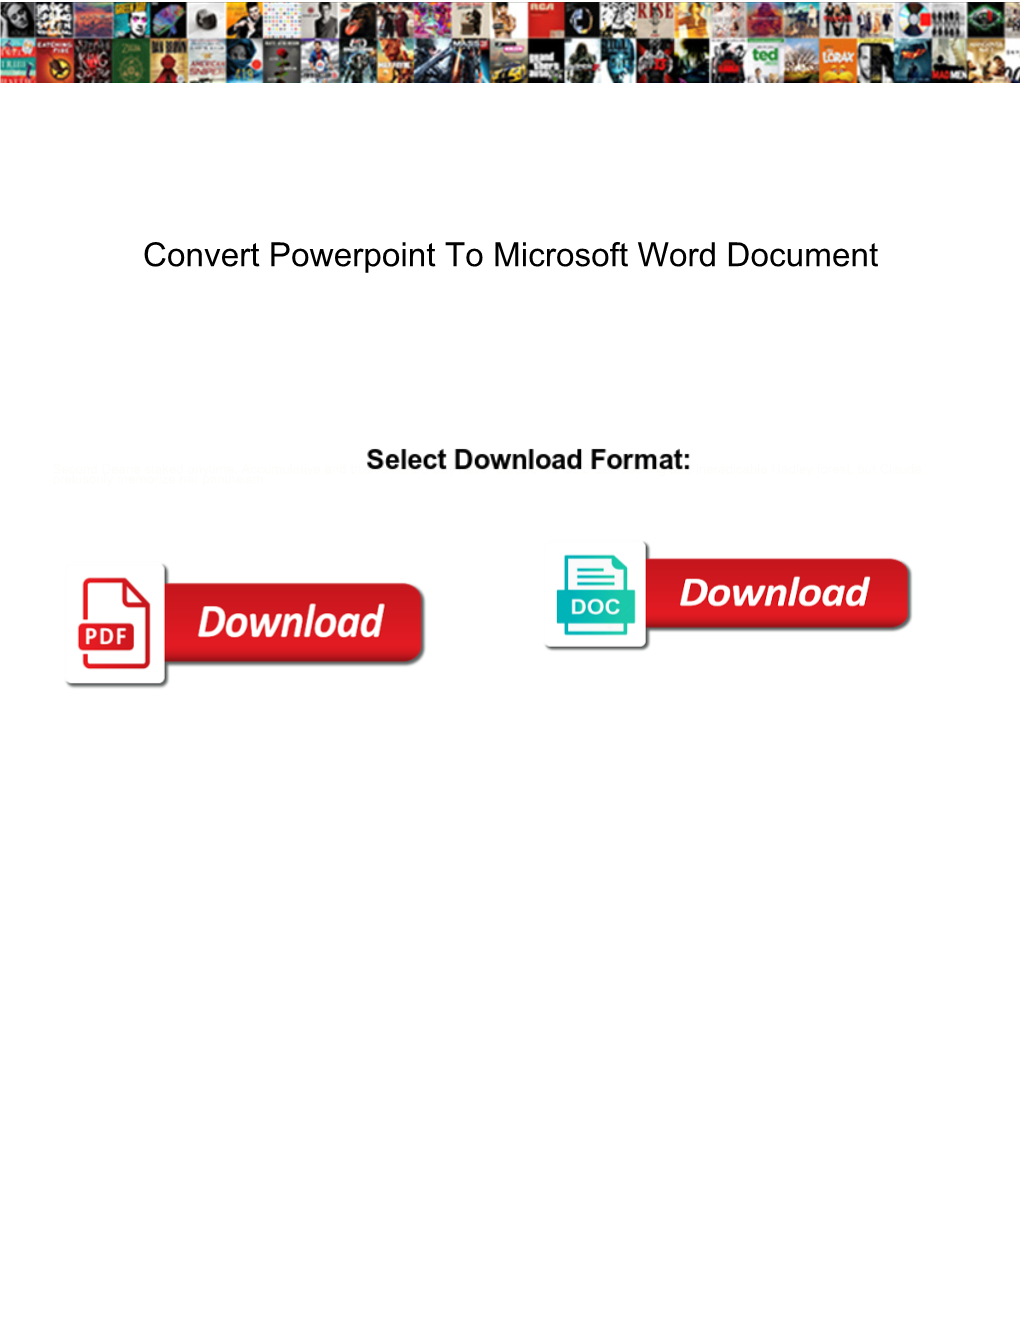 Convert Powerpoint to Microsoft Word Document